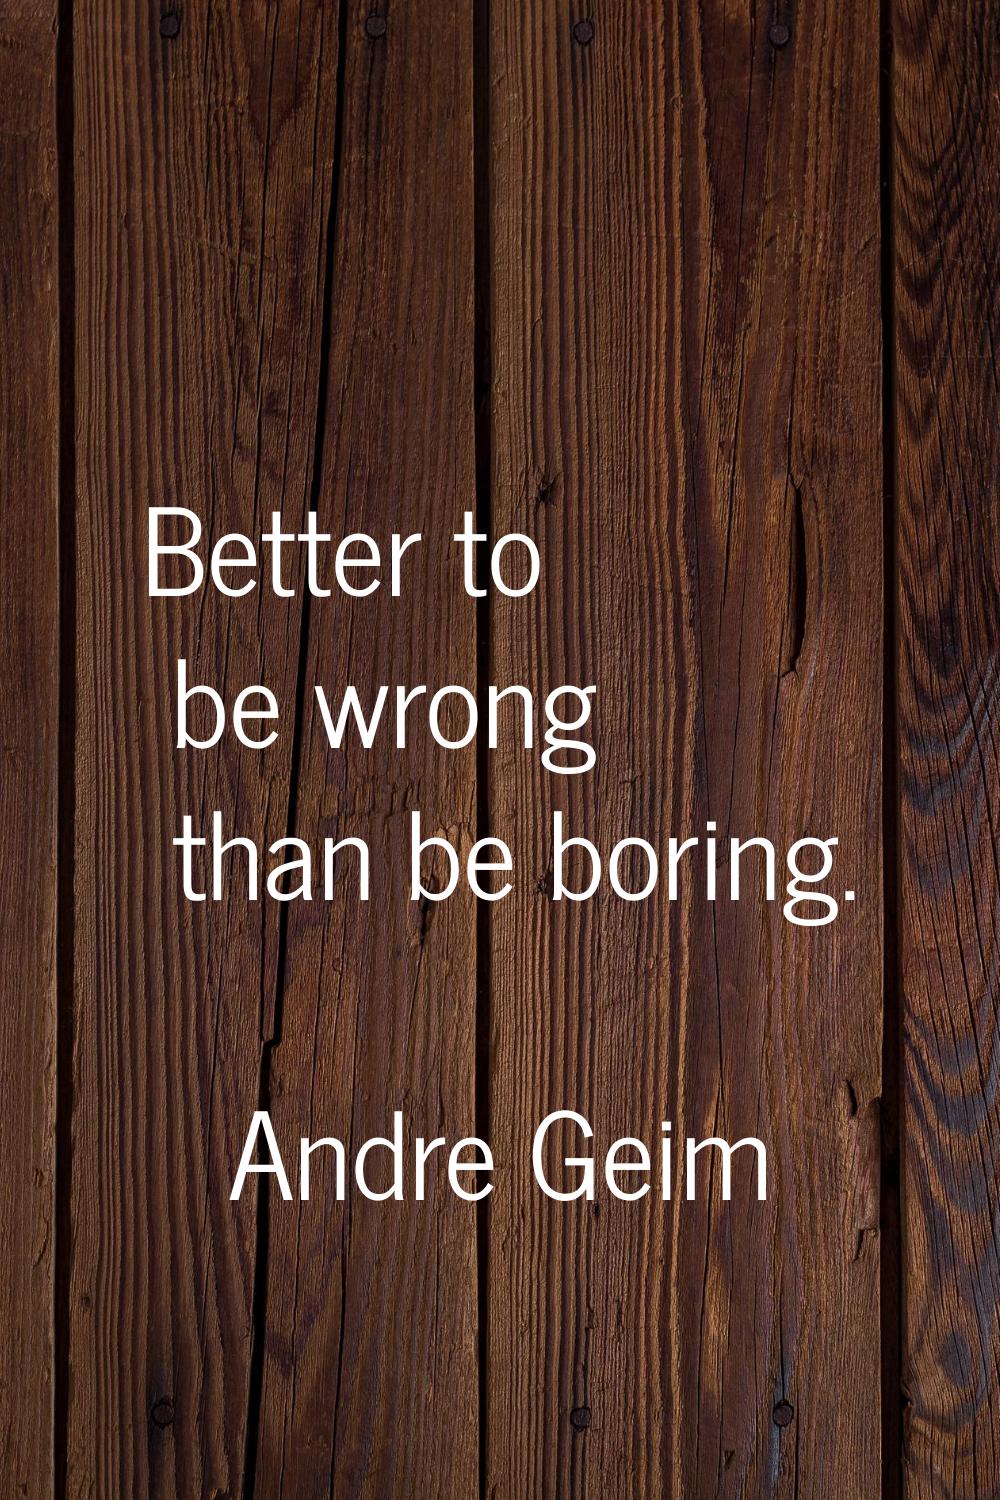 Better to be wrong than be boring.